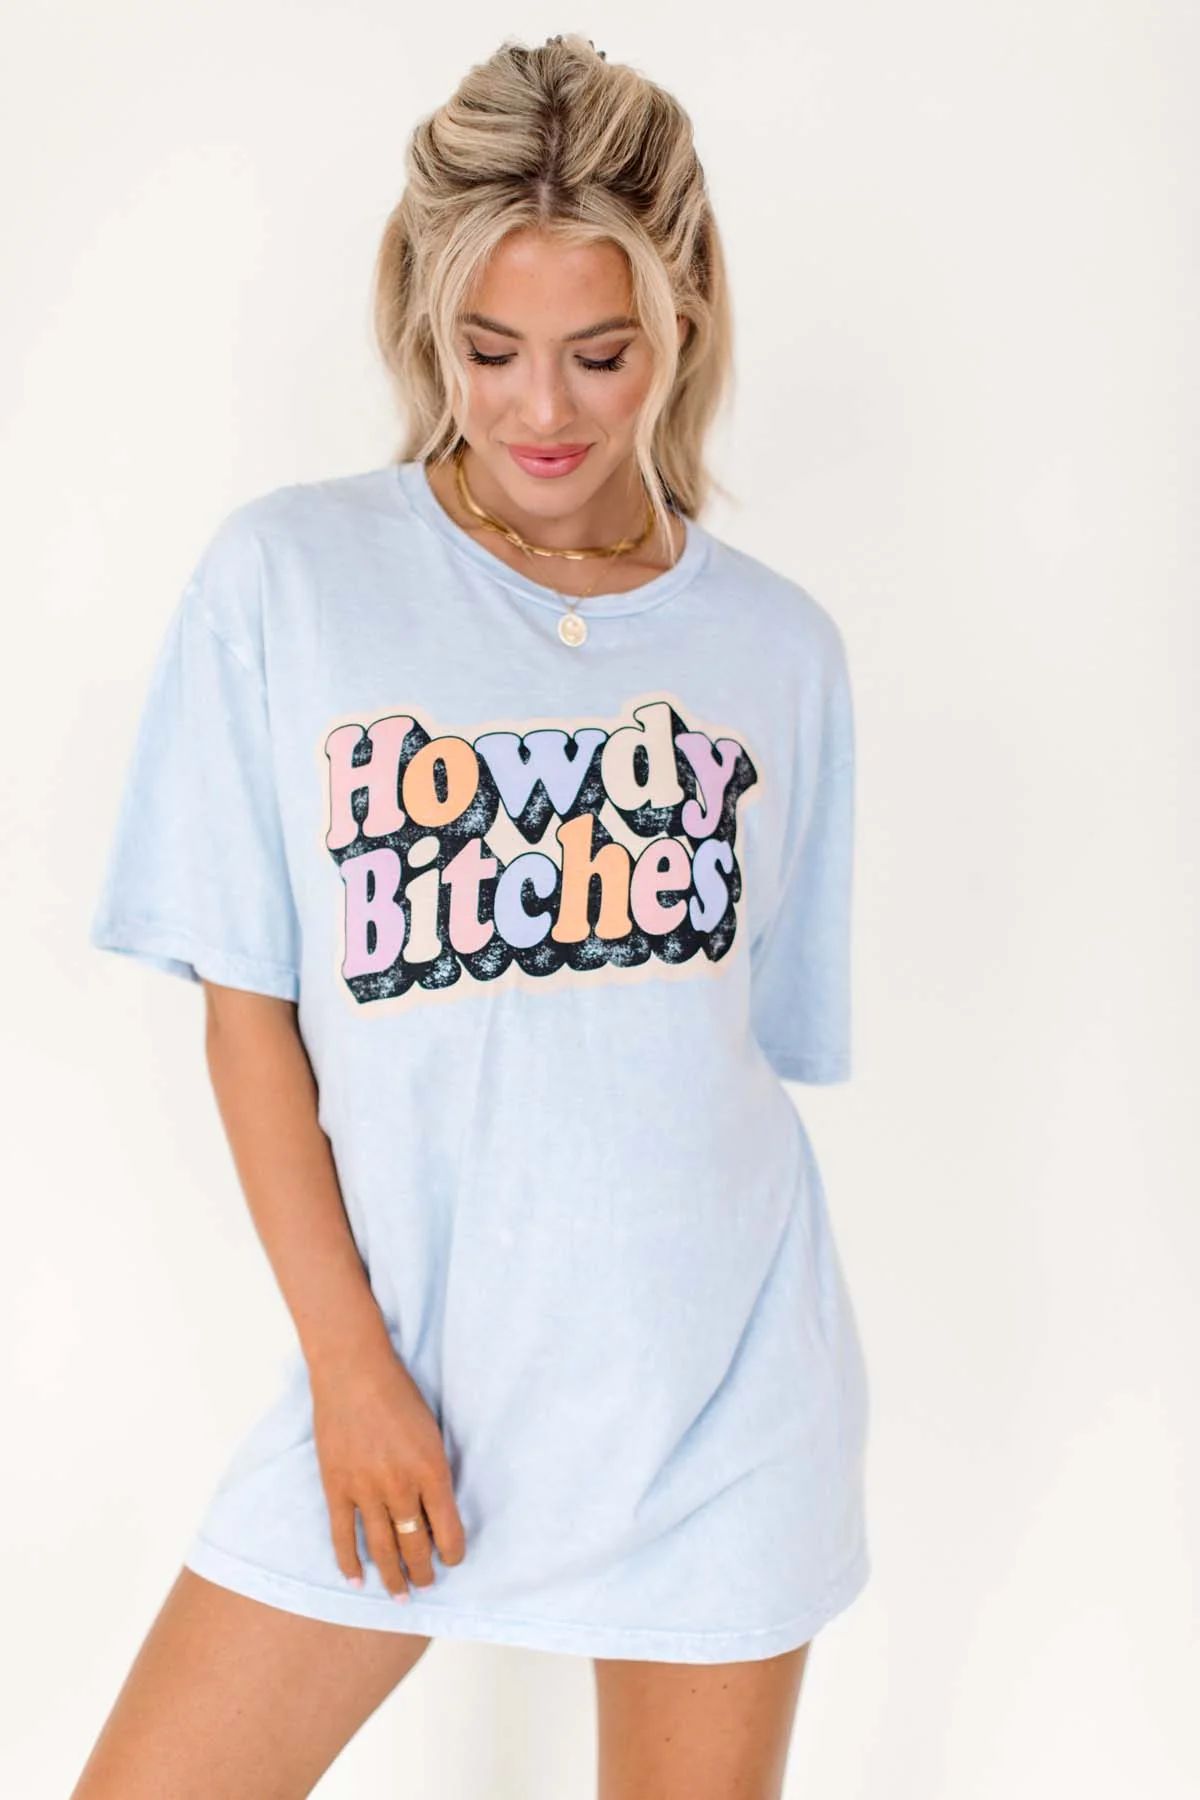 Howdy Graphic Tee | The Post